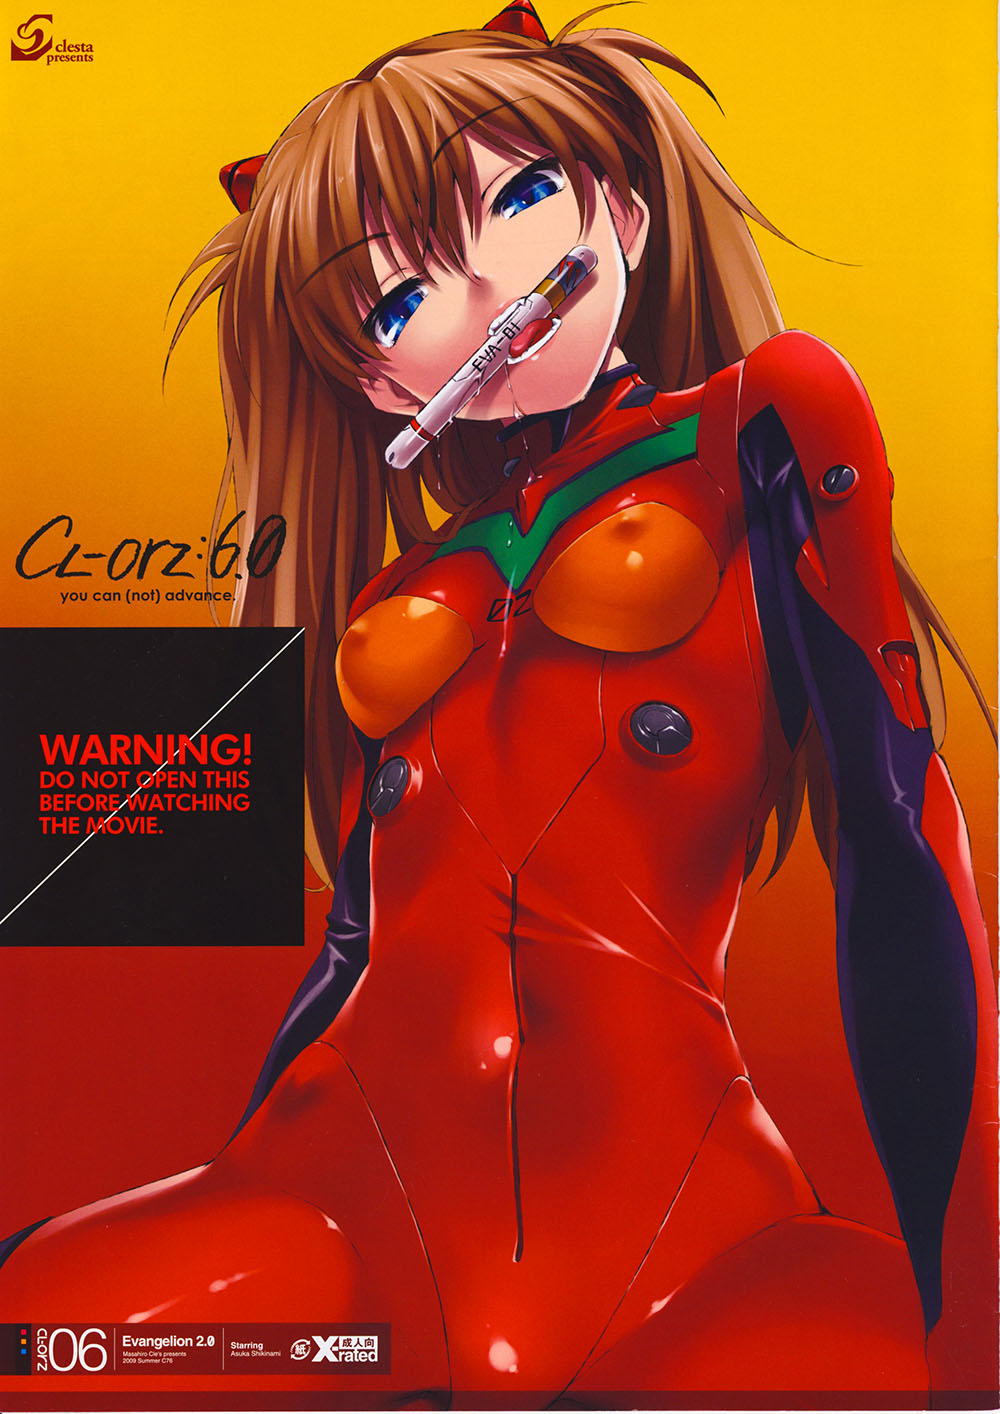 CL-orz 6.0 can not ADVANCE [Cle Masahiro]